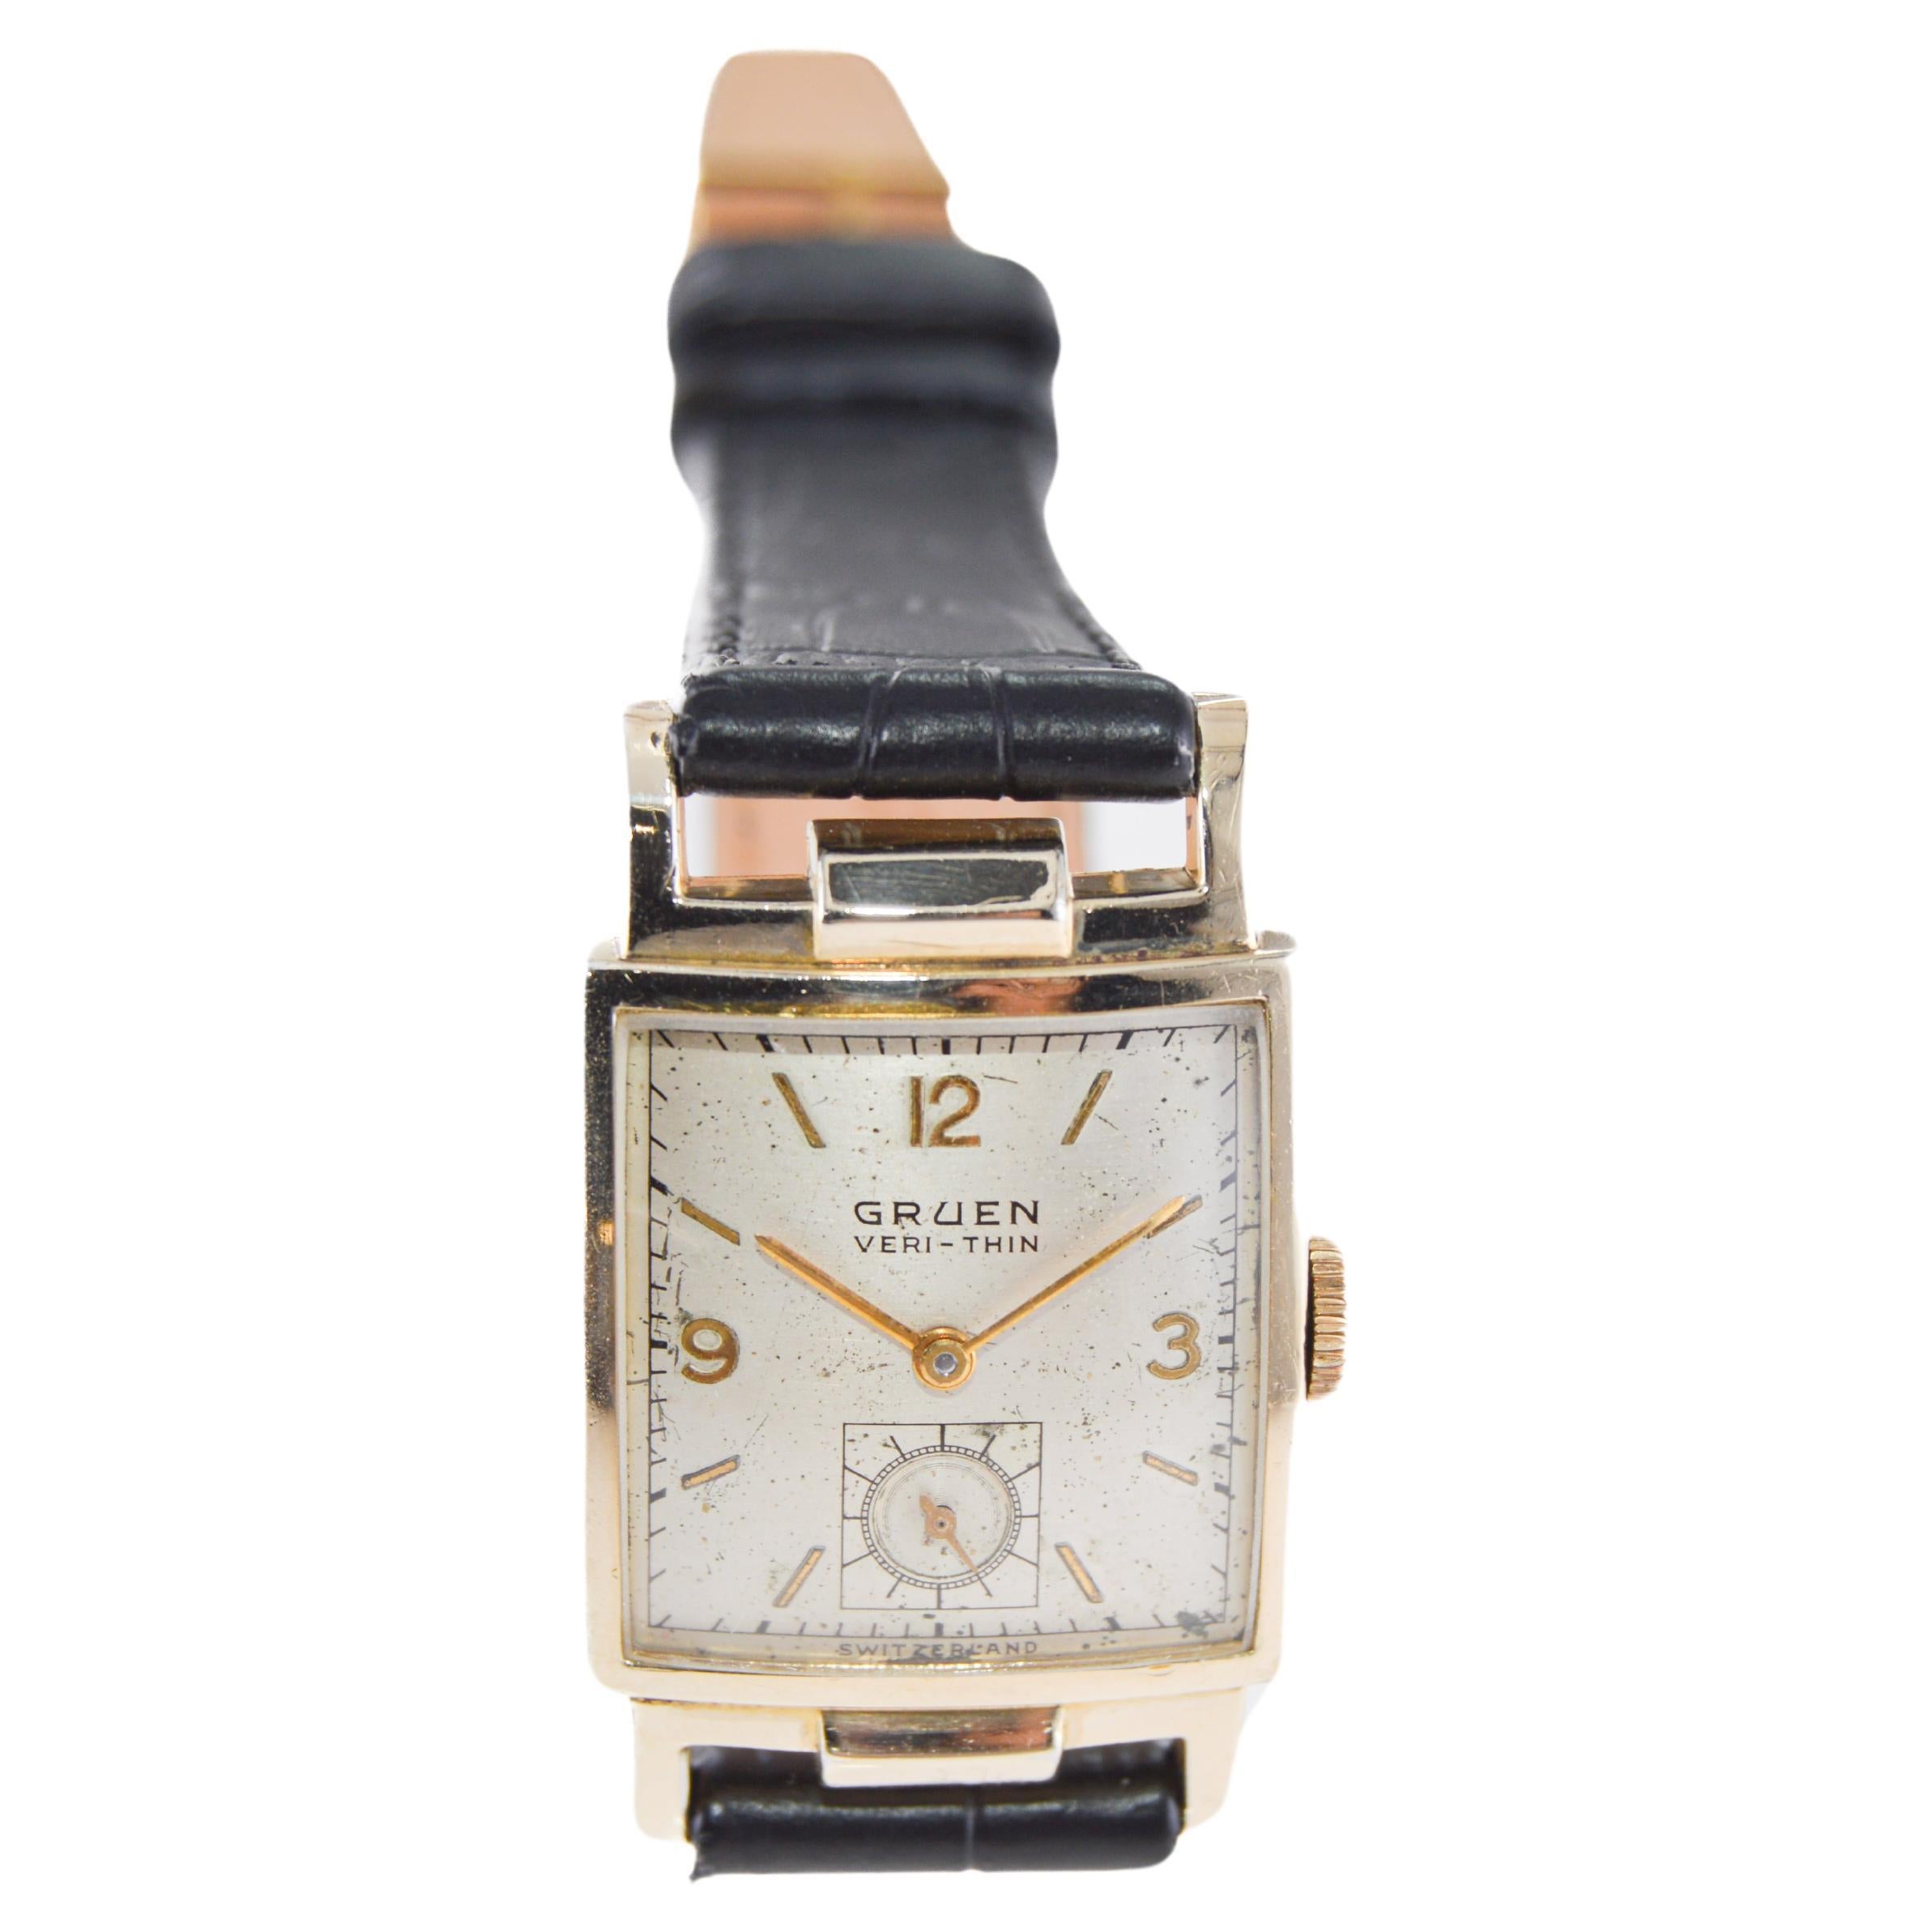 Gruen Yellow Gold Art Deco Tank Style watch with Original Dial from 1940's For Sale 2